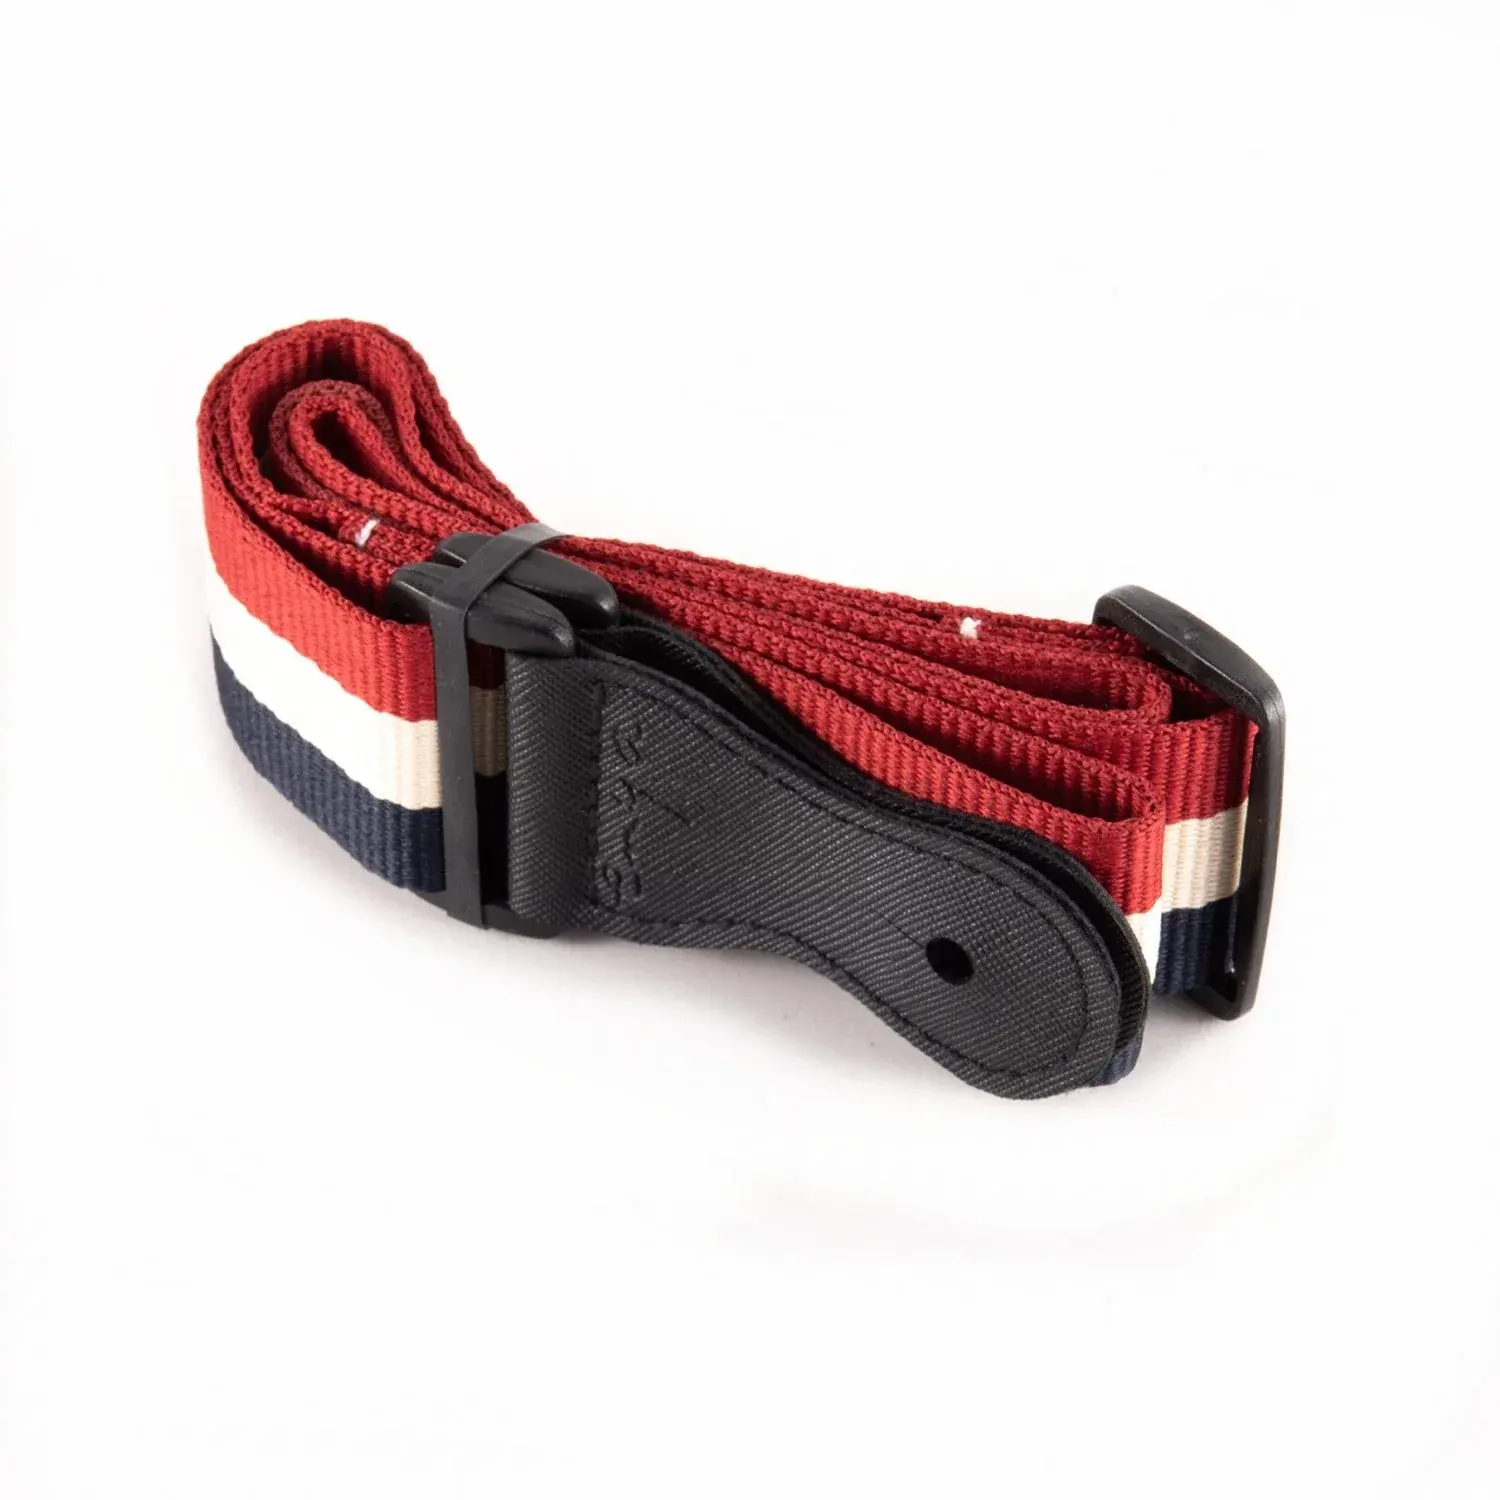 Enya ES-U2 Bass and Guitar Accessories Nylon Woven Adjustable Belt with Leather Ends Ukulele Strap